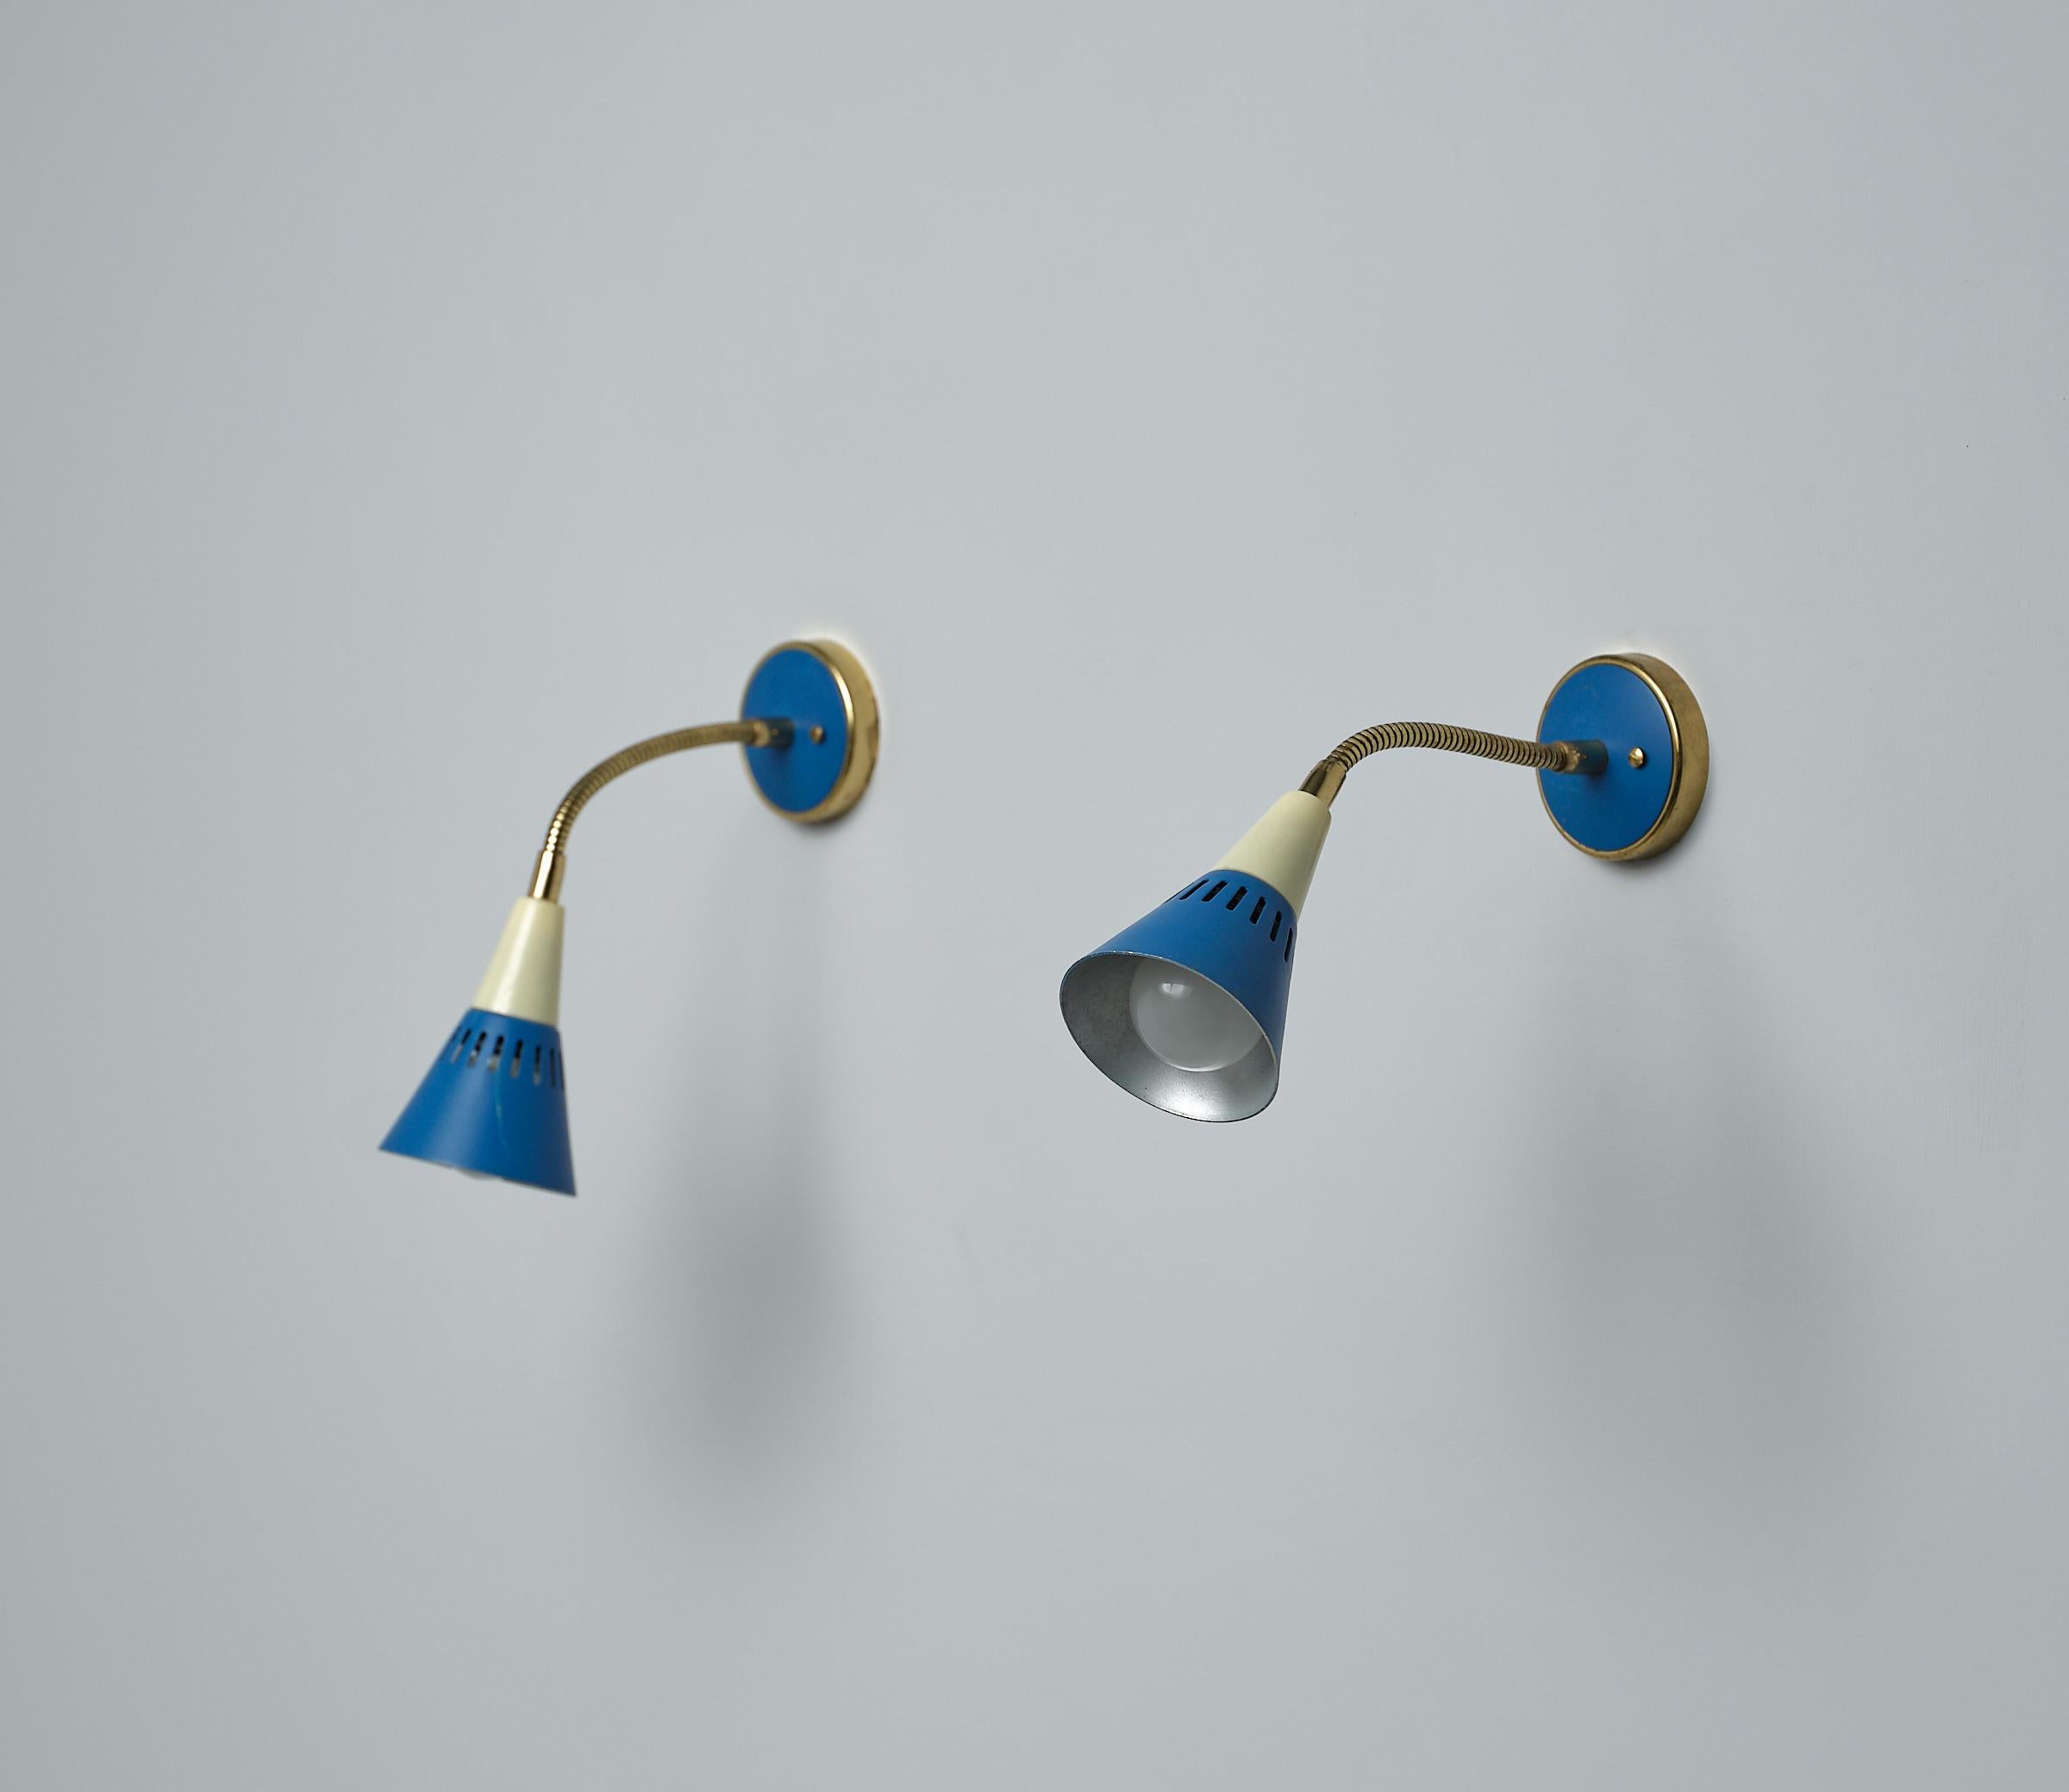 Presenting a  delightful pair of Italian-designed Appliques from the 1950s. Crafted with a blend of sophistication and whimsy, these appliques feature a charming combination of cream and blue lacquered metal, exuding retro elegance. The adjustable